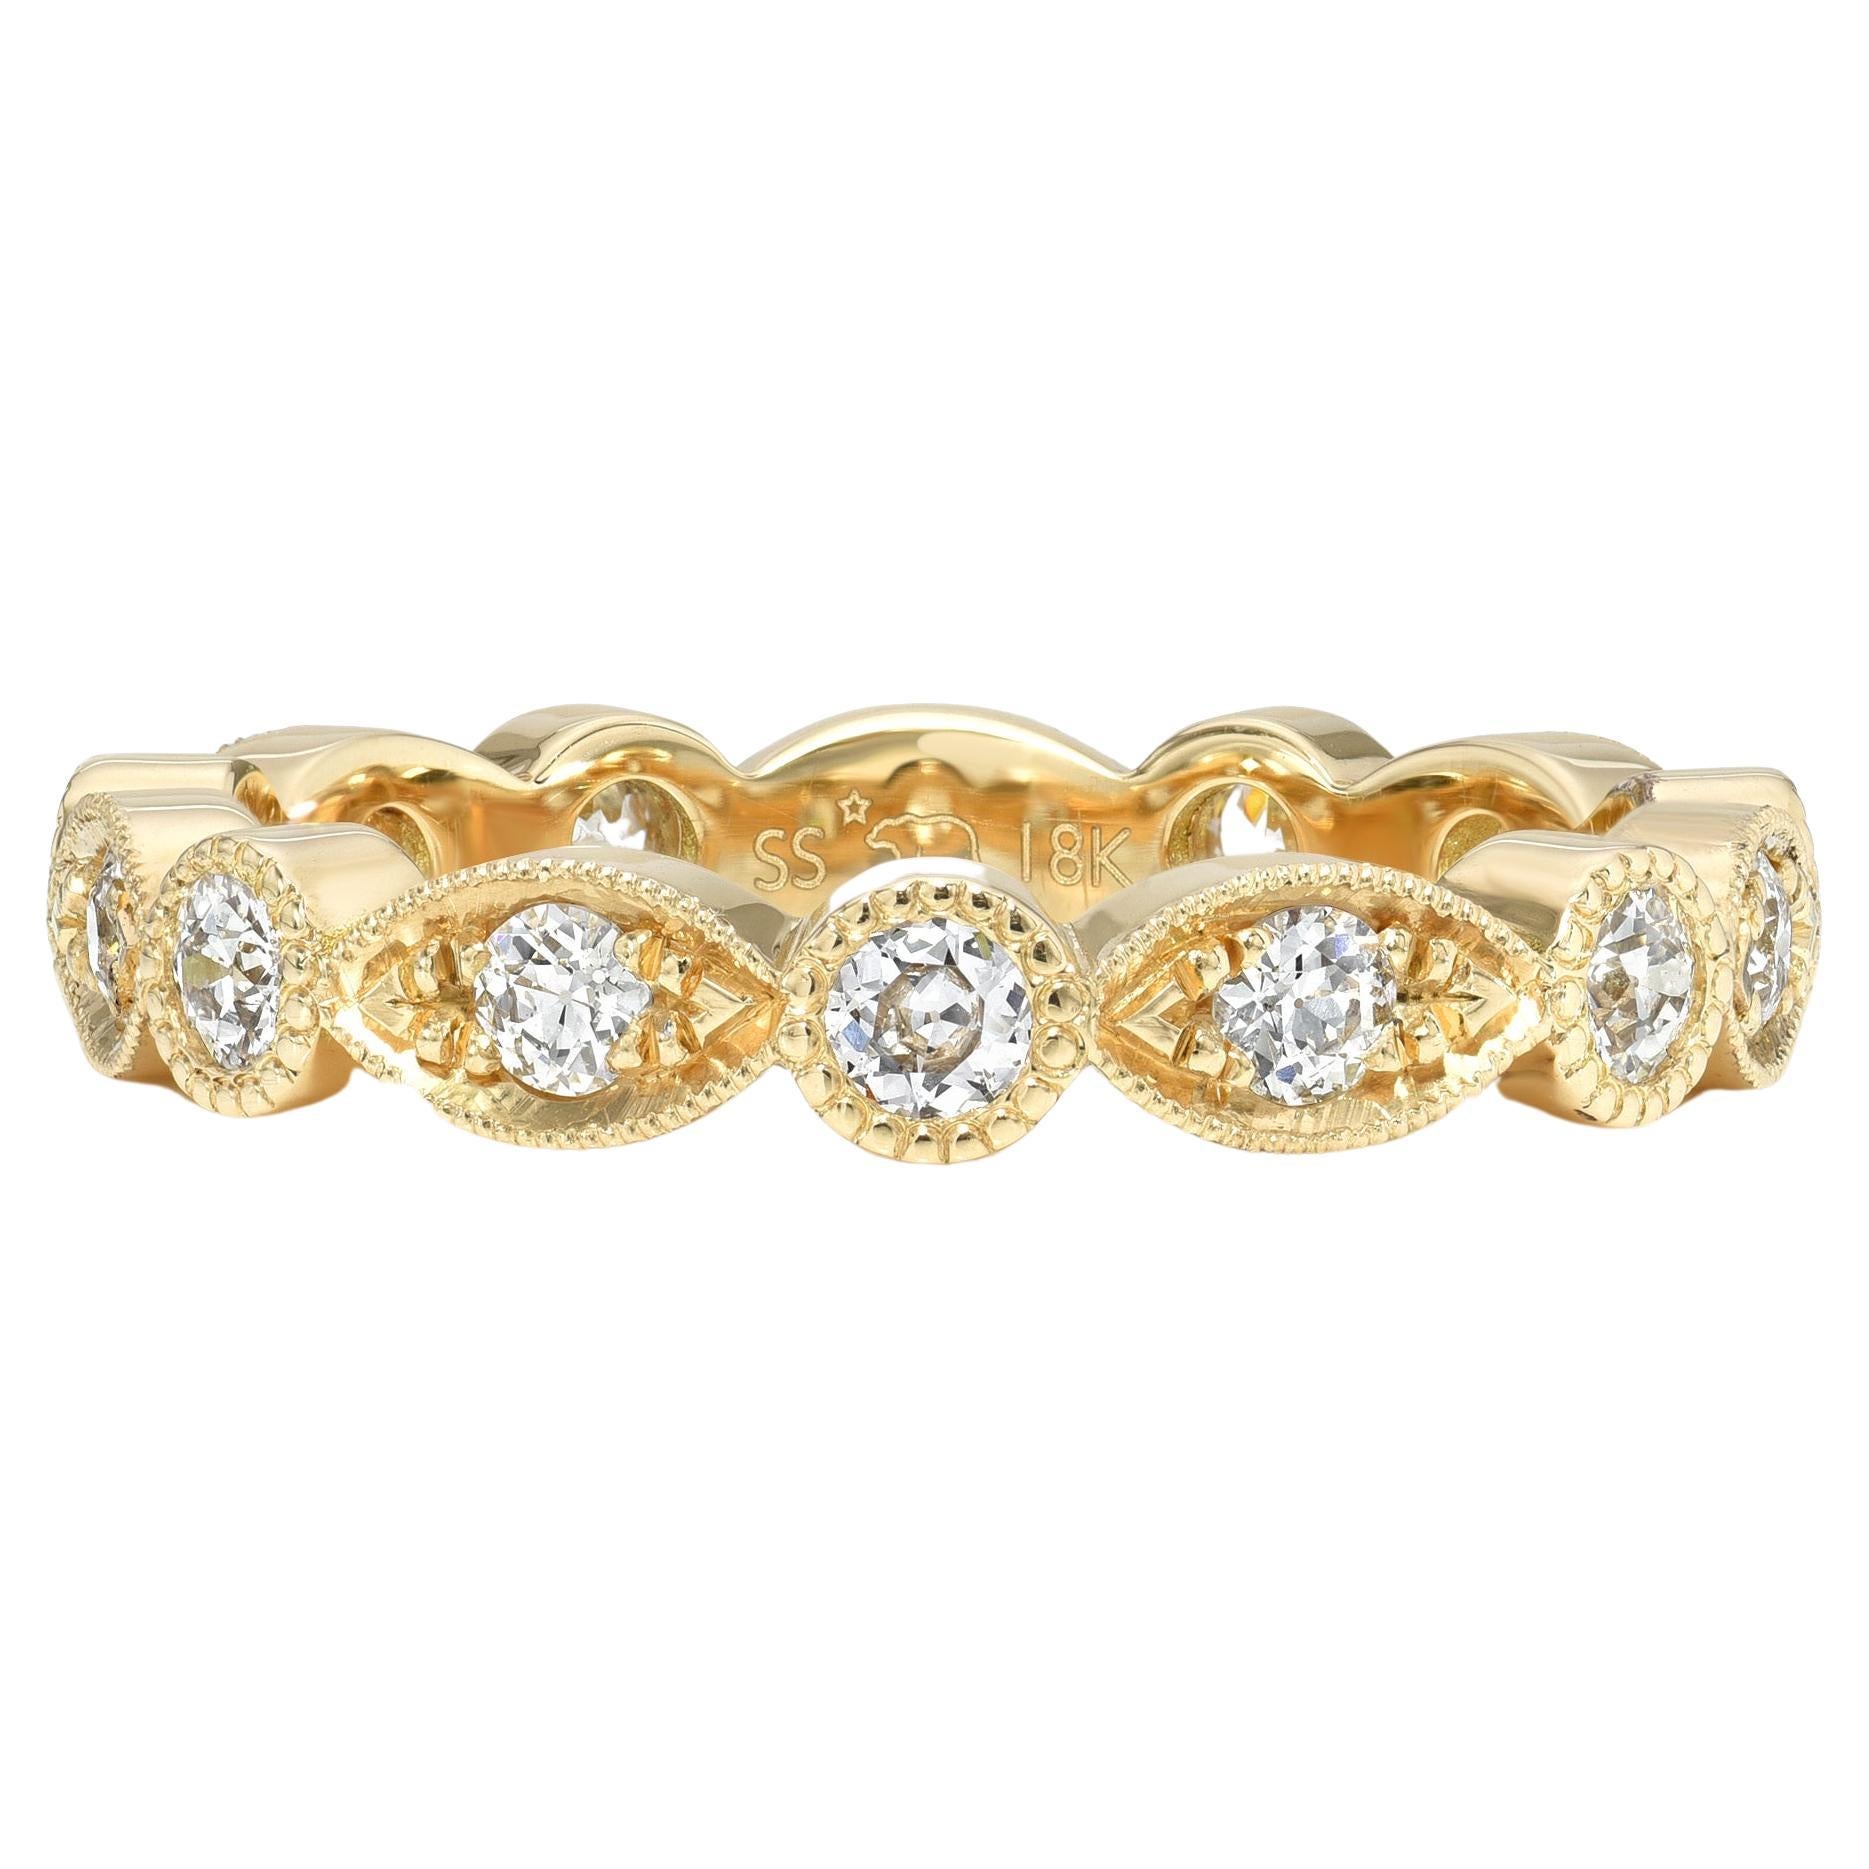 For Sale:  Handcrafted Elizabeth Old European Cut Diamond Eternity Band by Single Stone